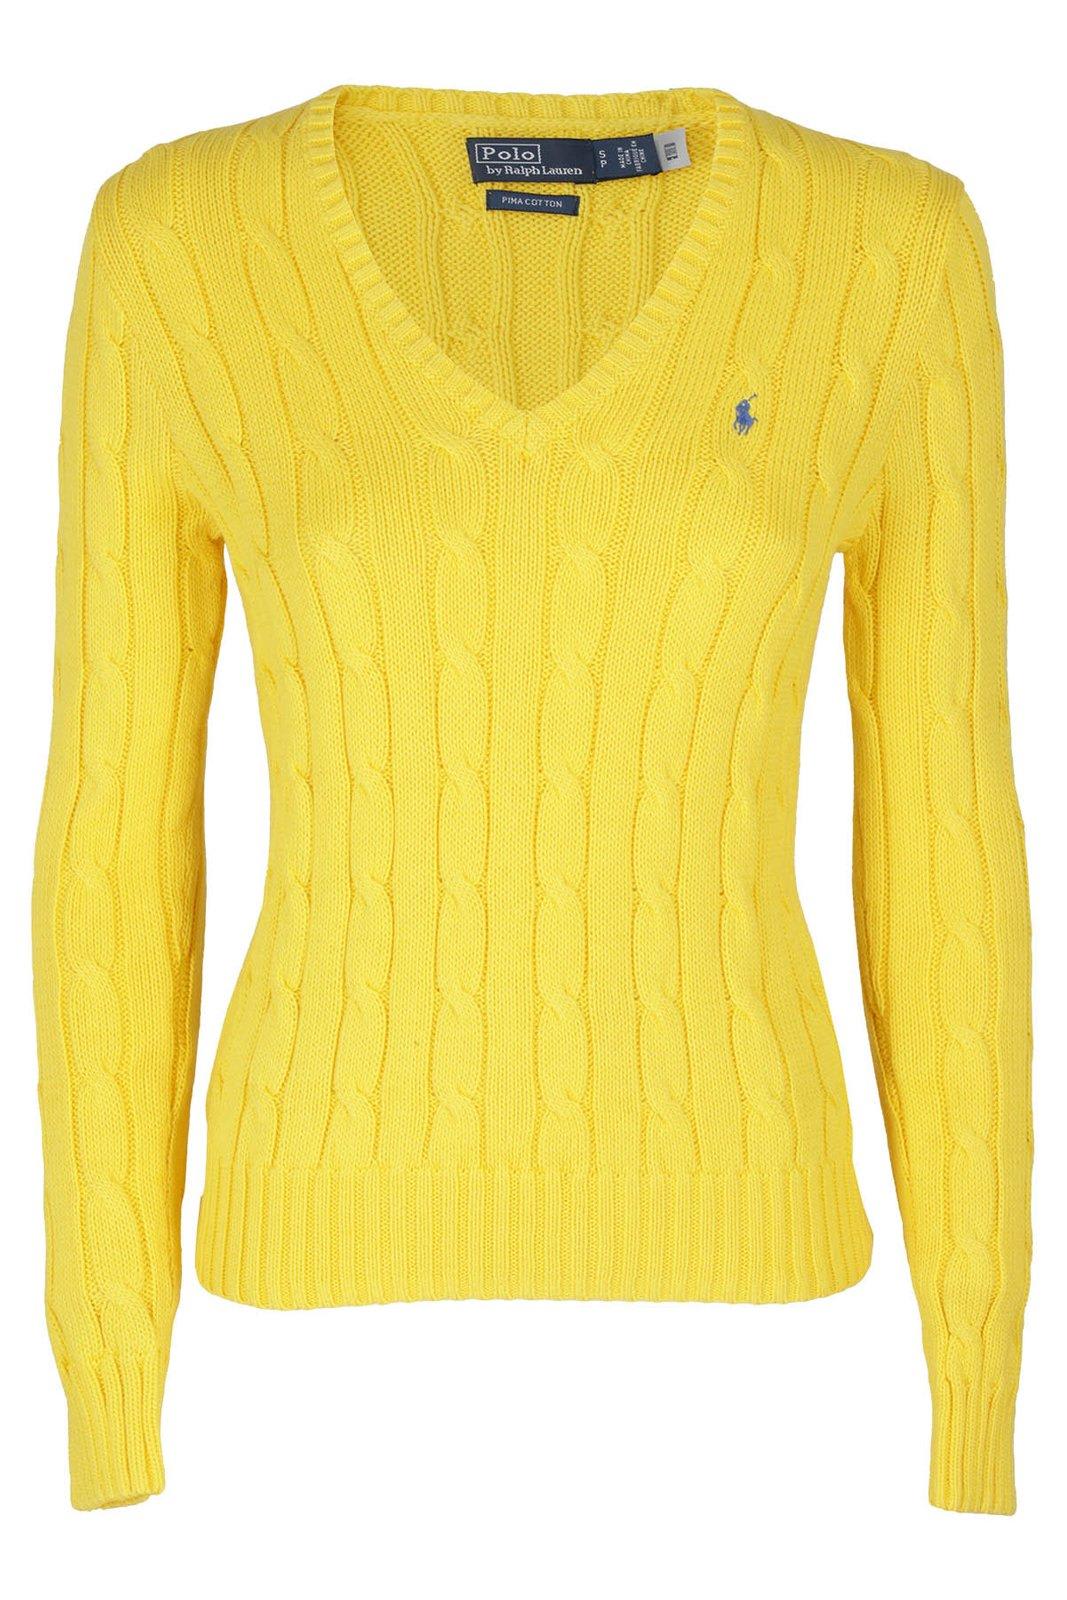 POLO RALPH LAUREN KIMBERLY CABLE-KNITTED V-NECK JUMPER